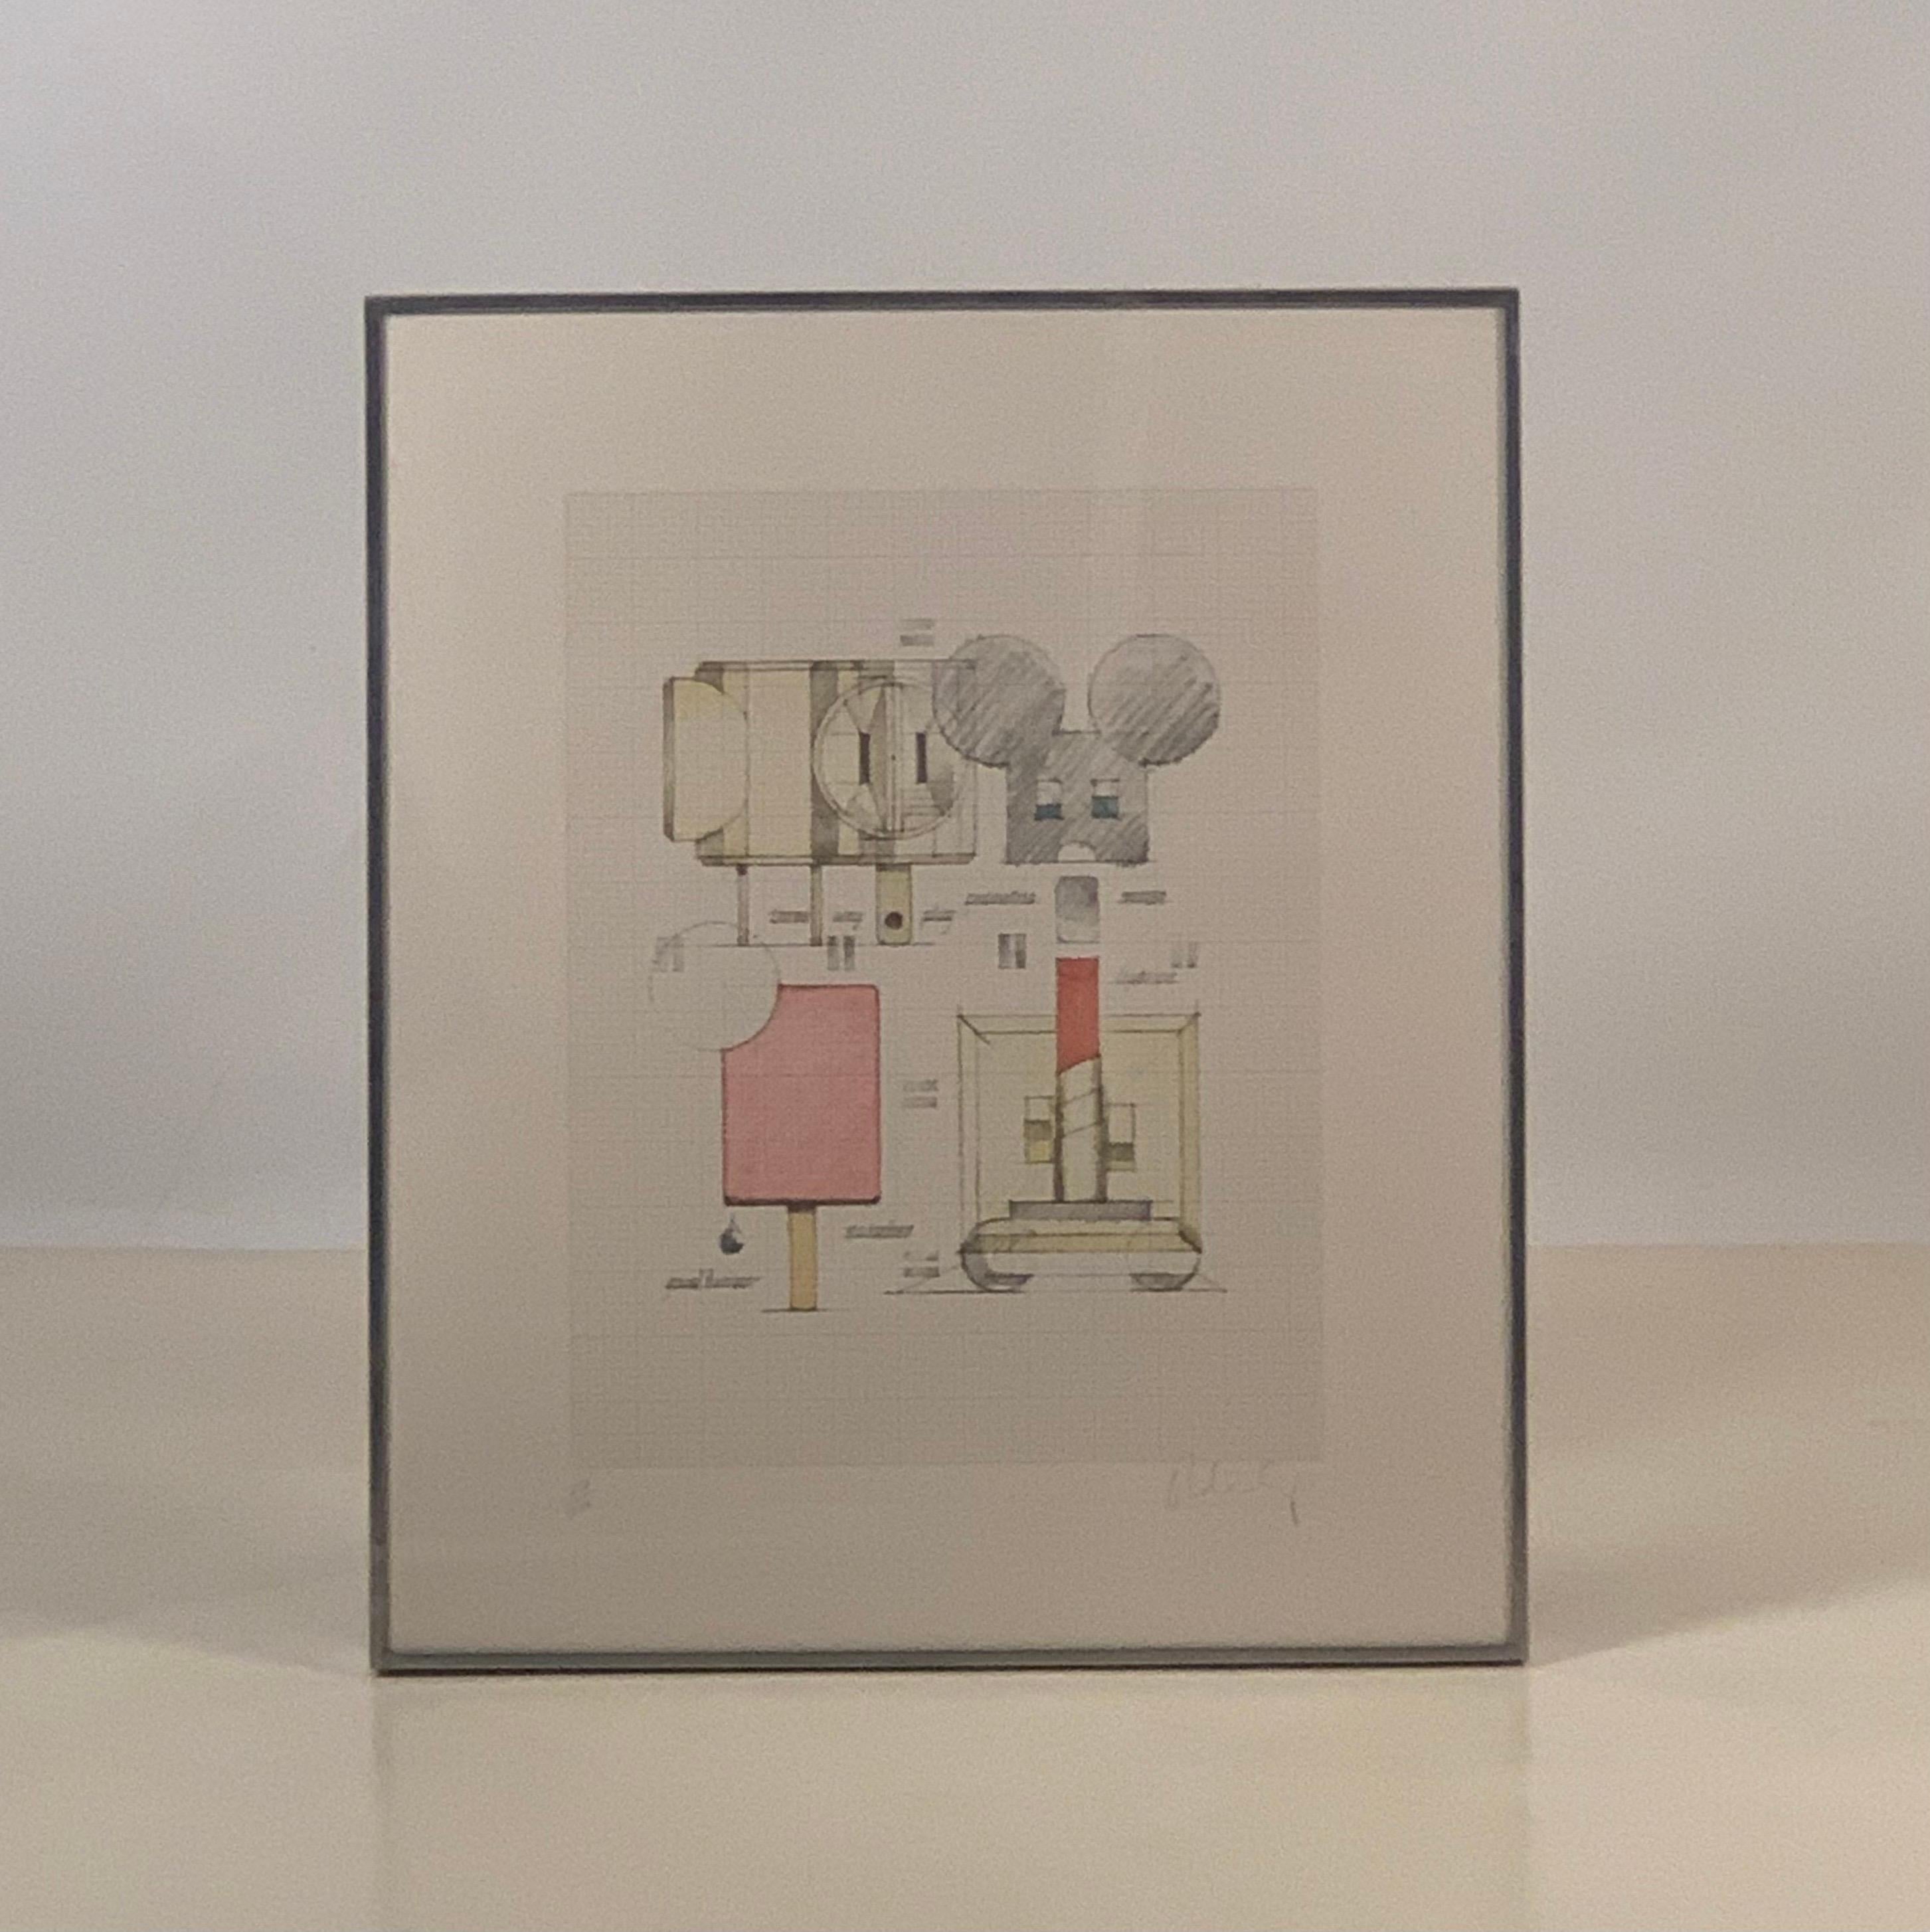 Claes Oldenburg
System Of Iconography - Plug, Mouse, Good Humor, Lipstick, Switches, 1970-1971
Signed Lower Right Corner
Numbered # 138/250, lower left corner

Beautifully framed in a high-end brushed aluminum frame.

Originally designed by